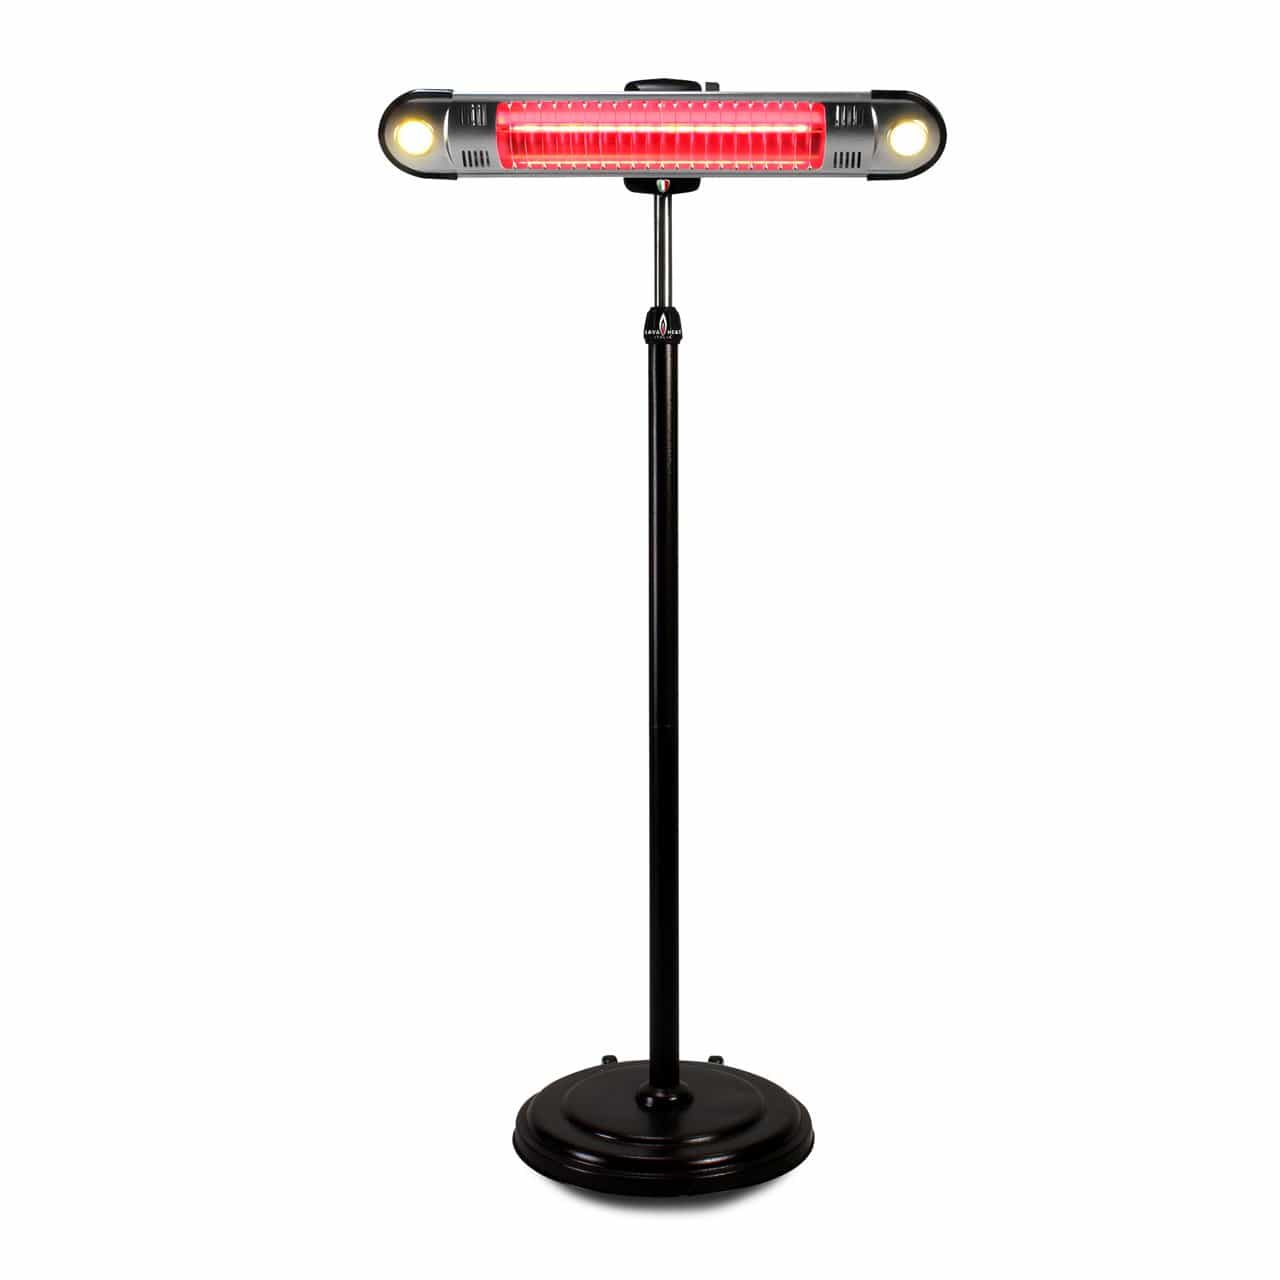 Lava Heat Italia Electric Freestanding Heaters The WALL-E Pedestal Heater, 72" with Wall Mount, Remote Control, Push Button Ignition, Stainless Steel, Electric - KNOCK DOWN